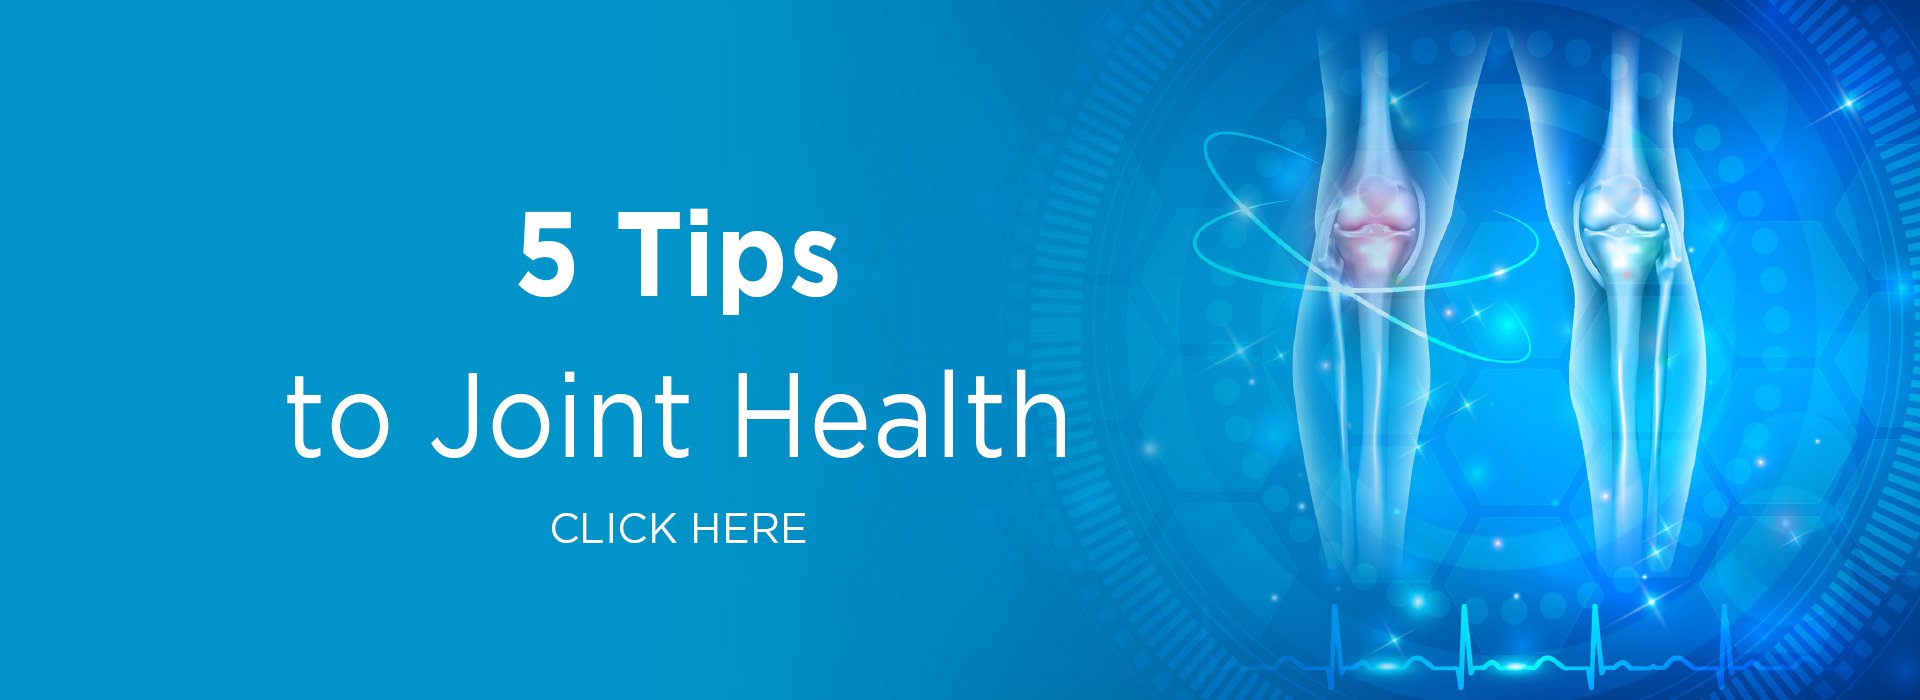 New Image International:5 tips to Joint Health